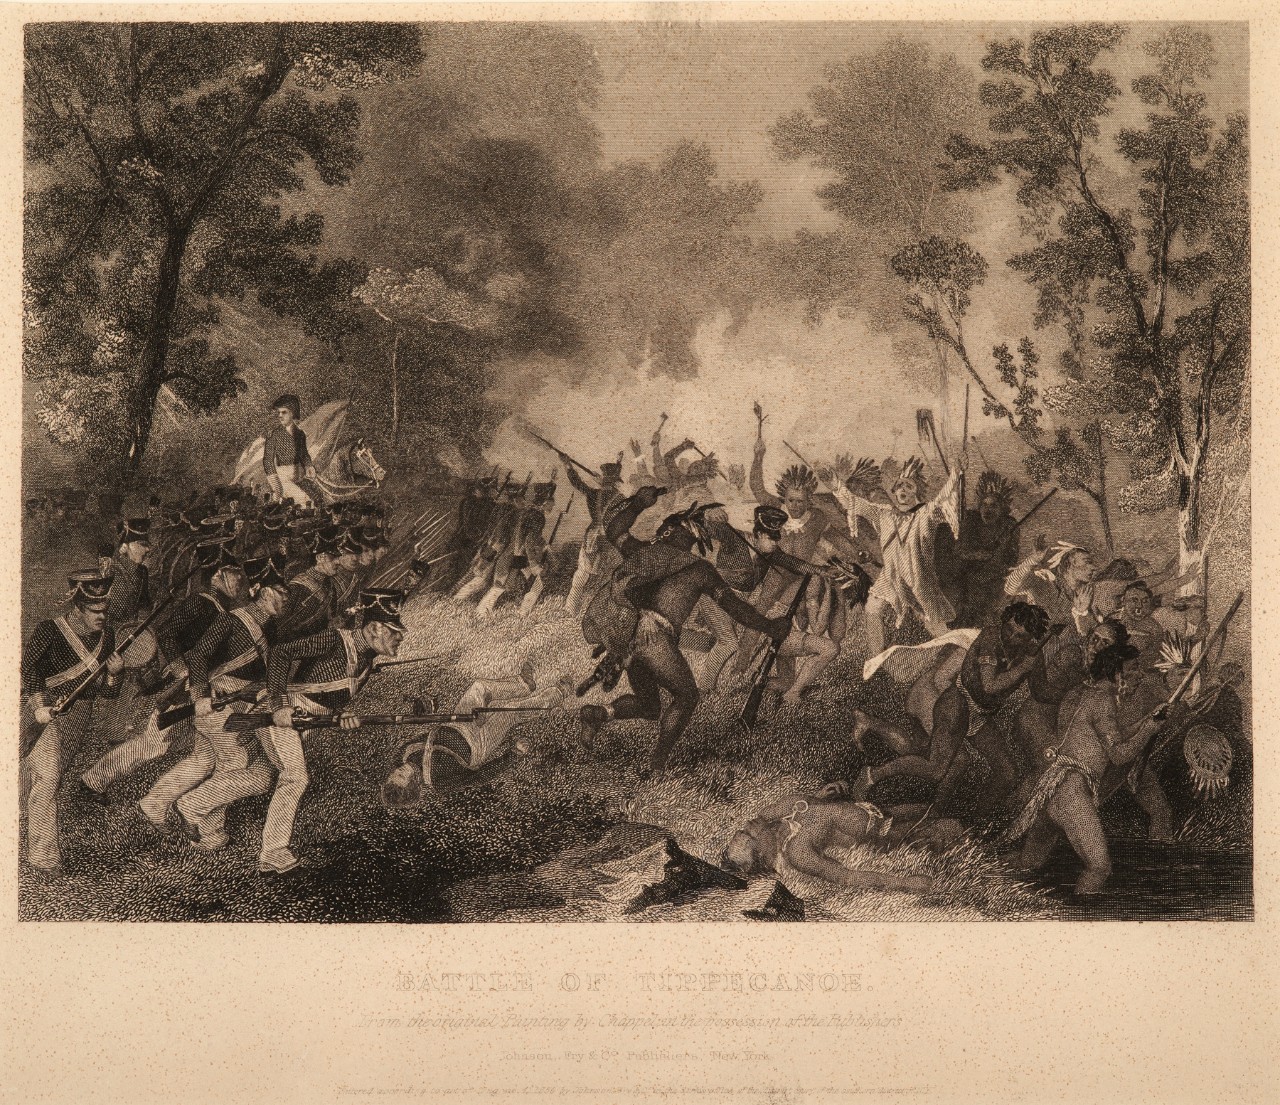 Battle between American forces and Native American forces